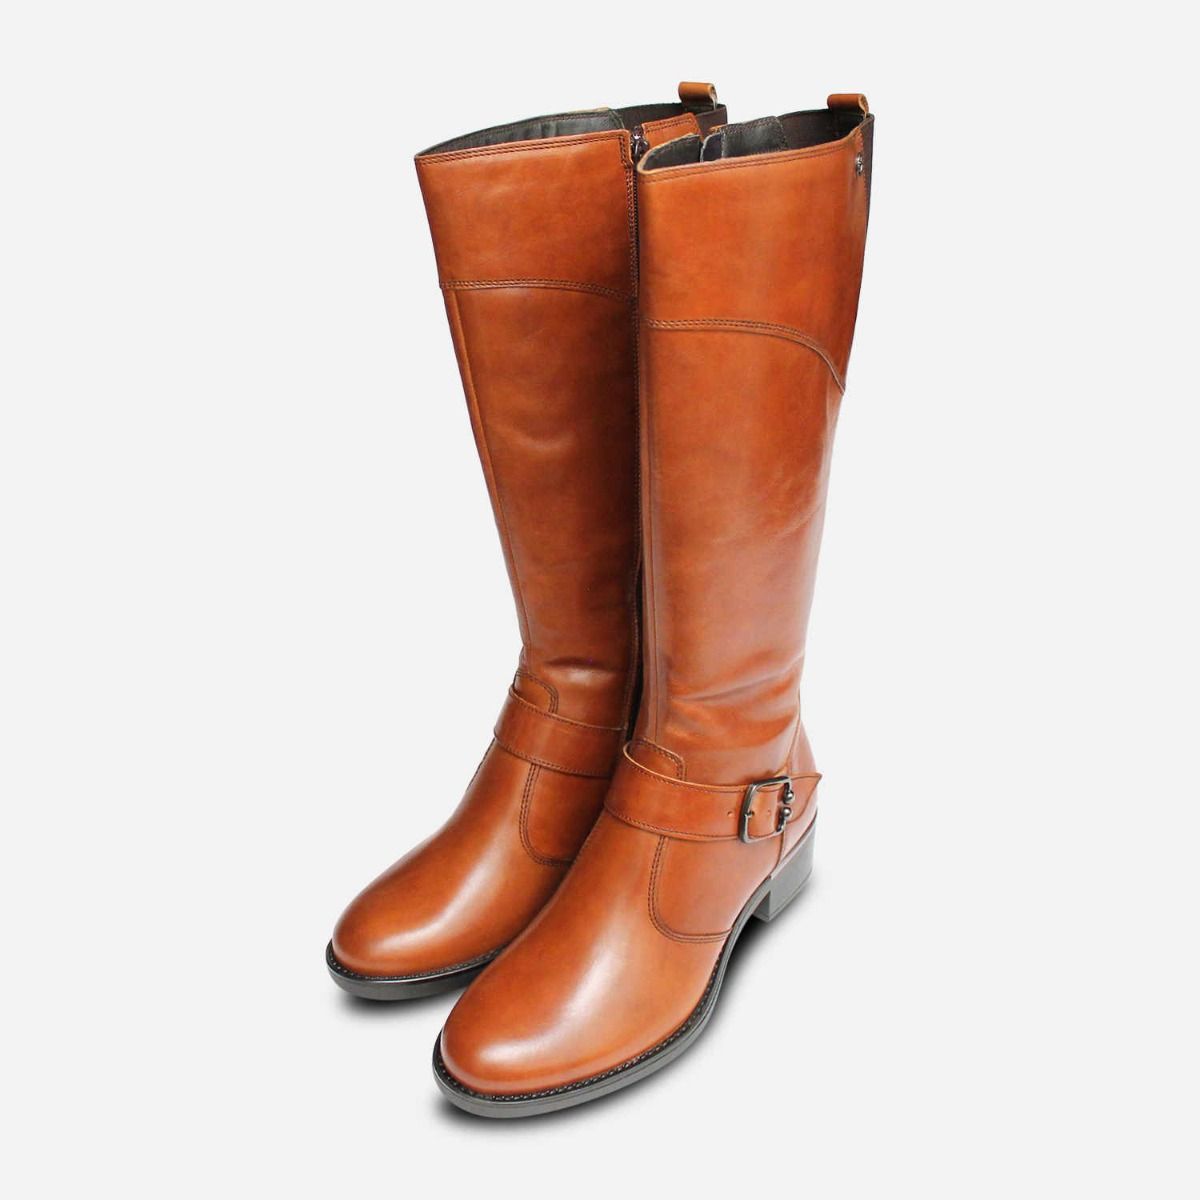 Ladies Long Brown Leather Boots | canoeracing.org.uk